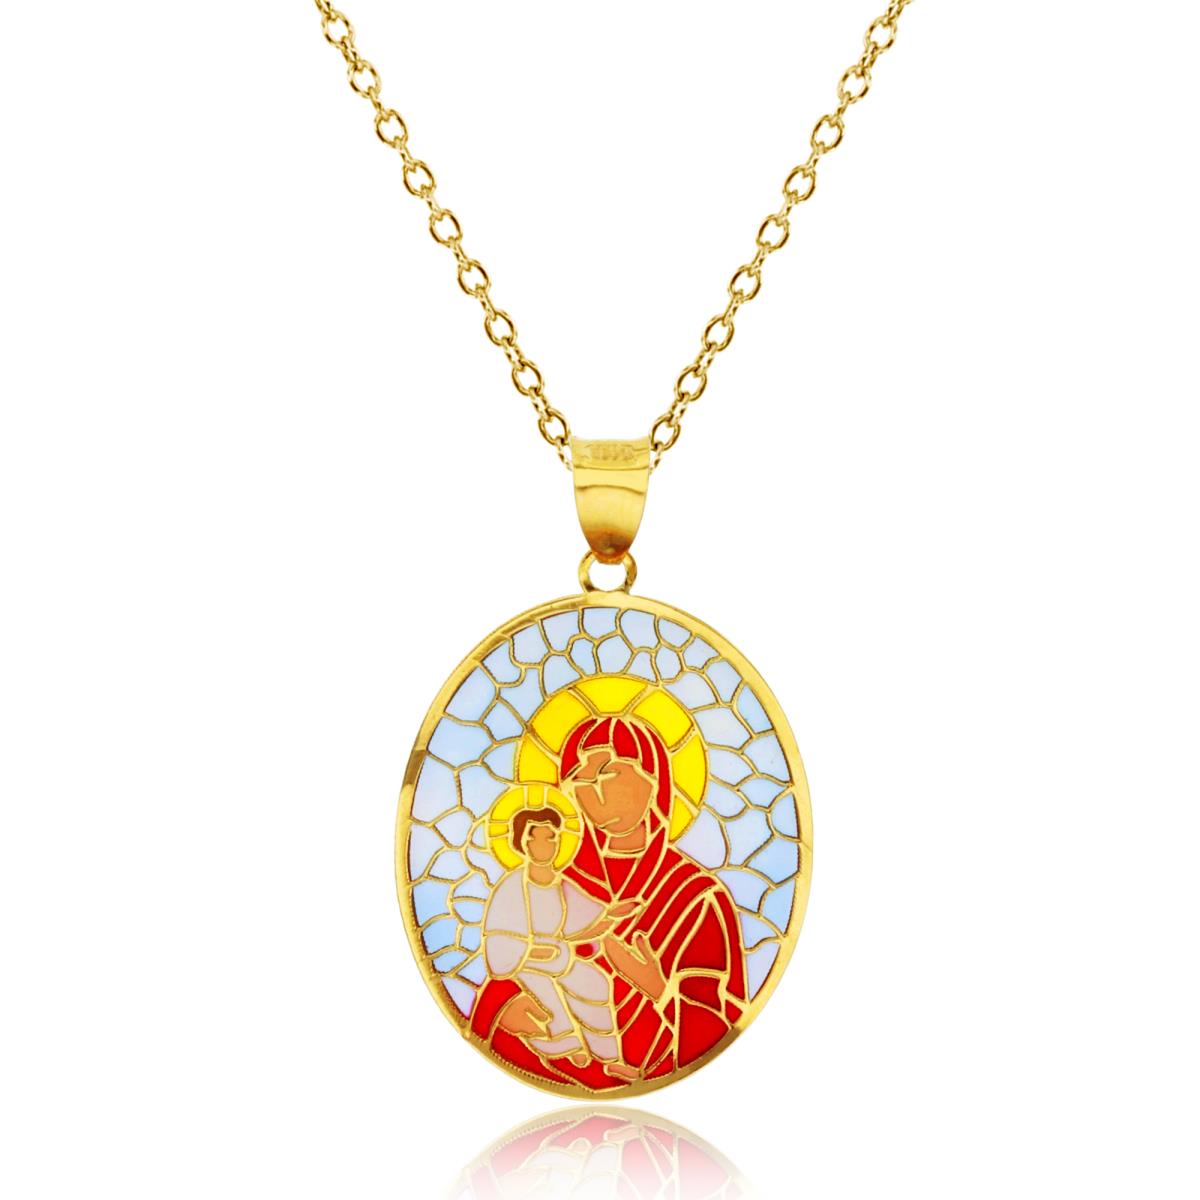 10K Yellow Gold Enamel 30x18mm Mosaic Virgin Mary & Baby Jesus 18" 020 Rollo Chain Necklace